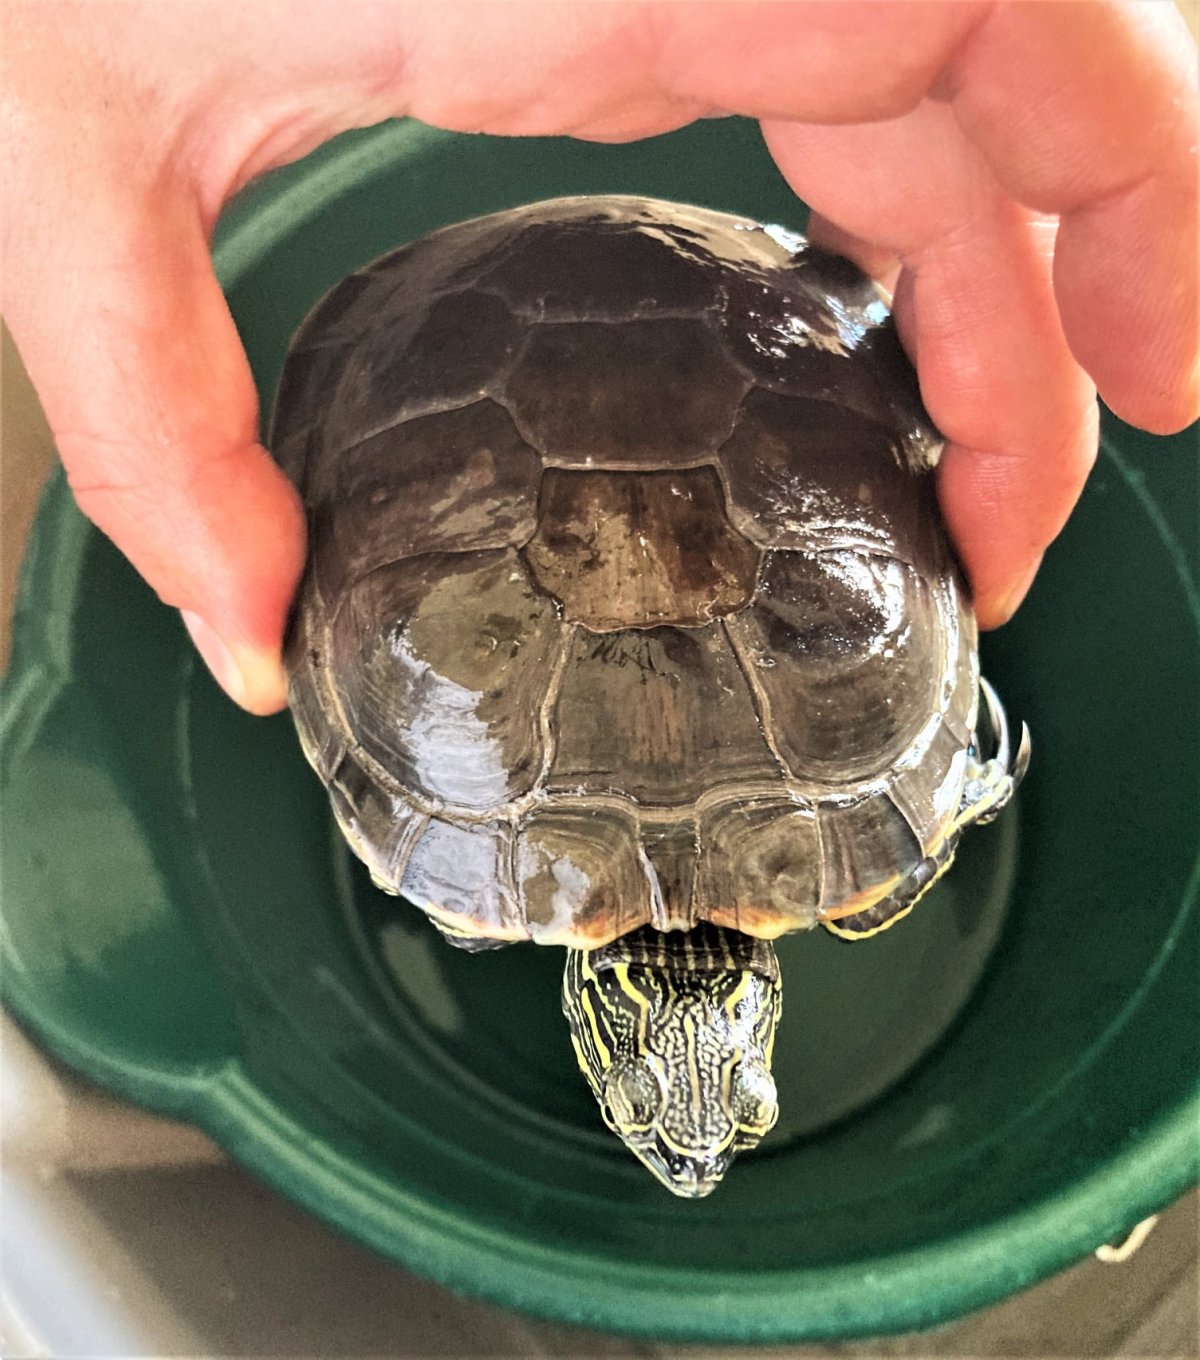 A complaint was made to the Report All Poachers and Polluters hotline from someone who had seen the turtle advertised for sale online, and the conservation service said it launched an investigation at that point. .